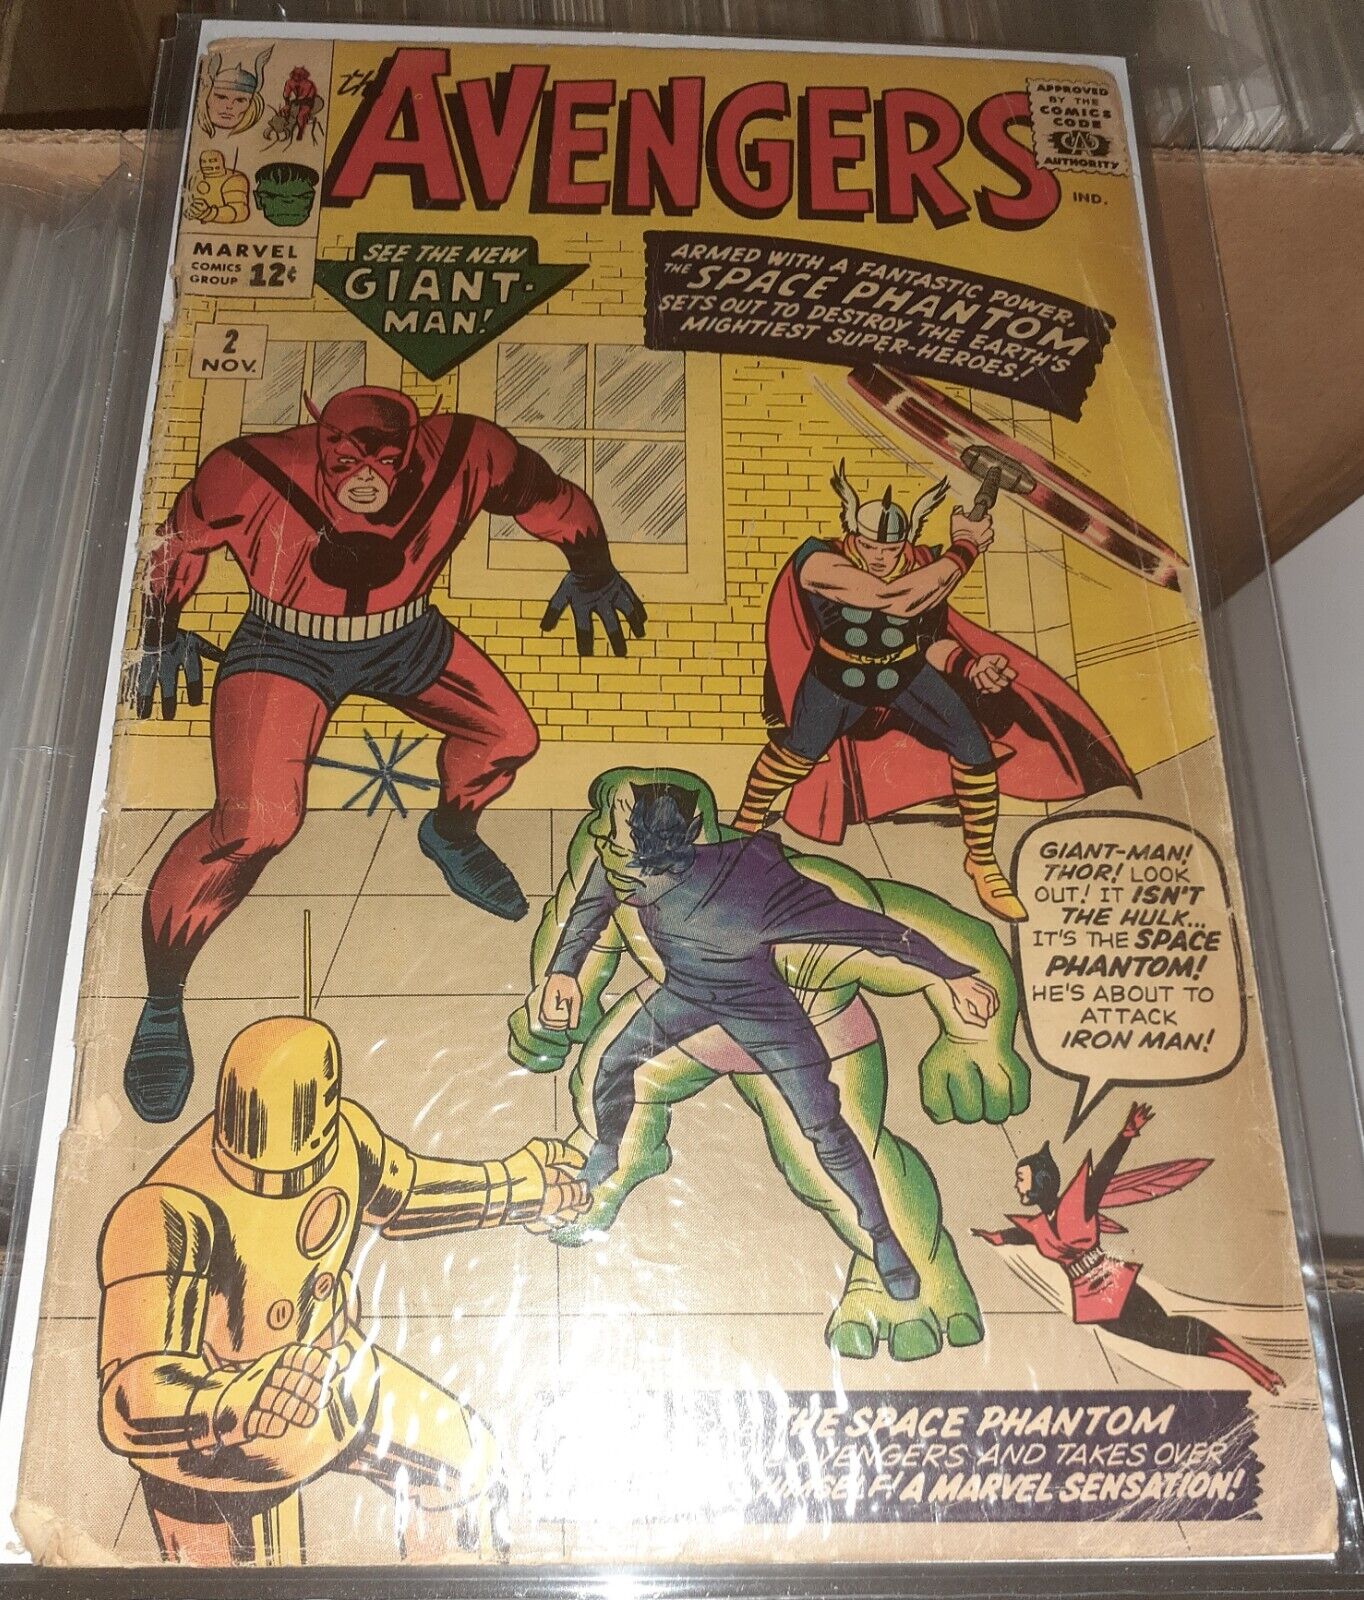 AVENGERS #2 - Good Condition - Complete Marvel Classic 